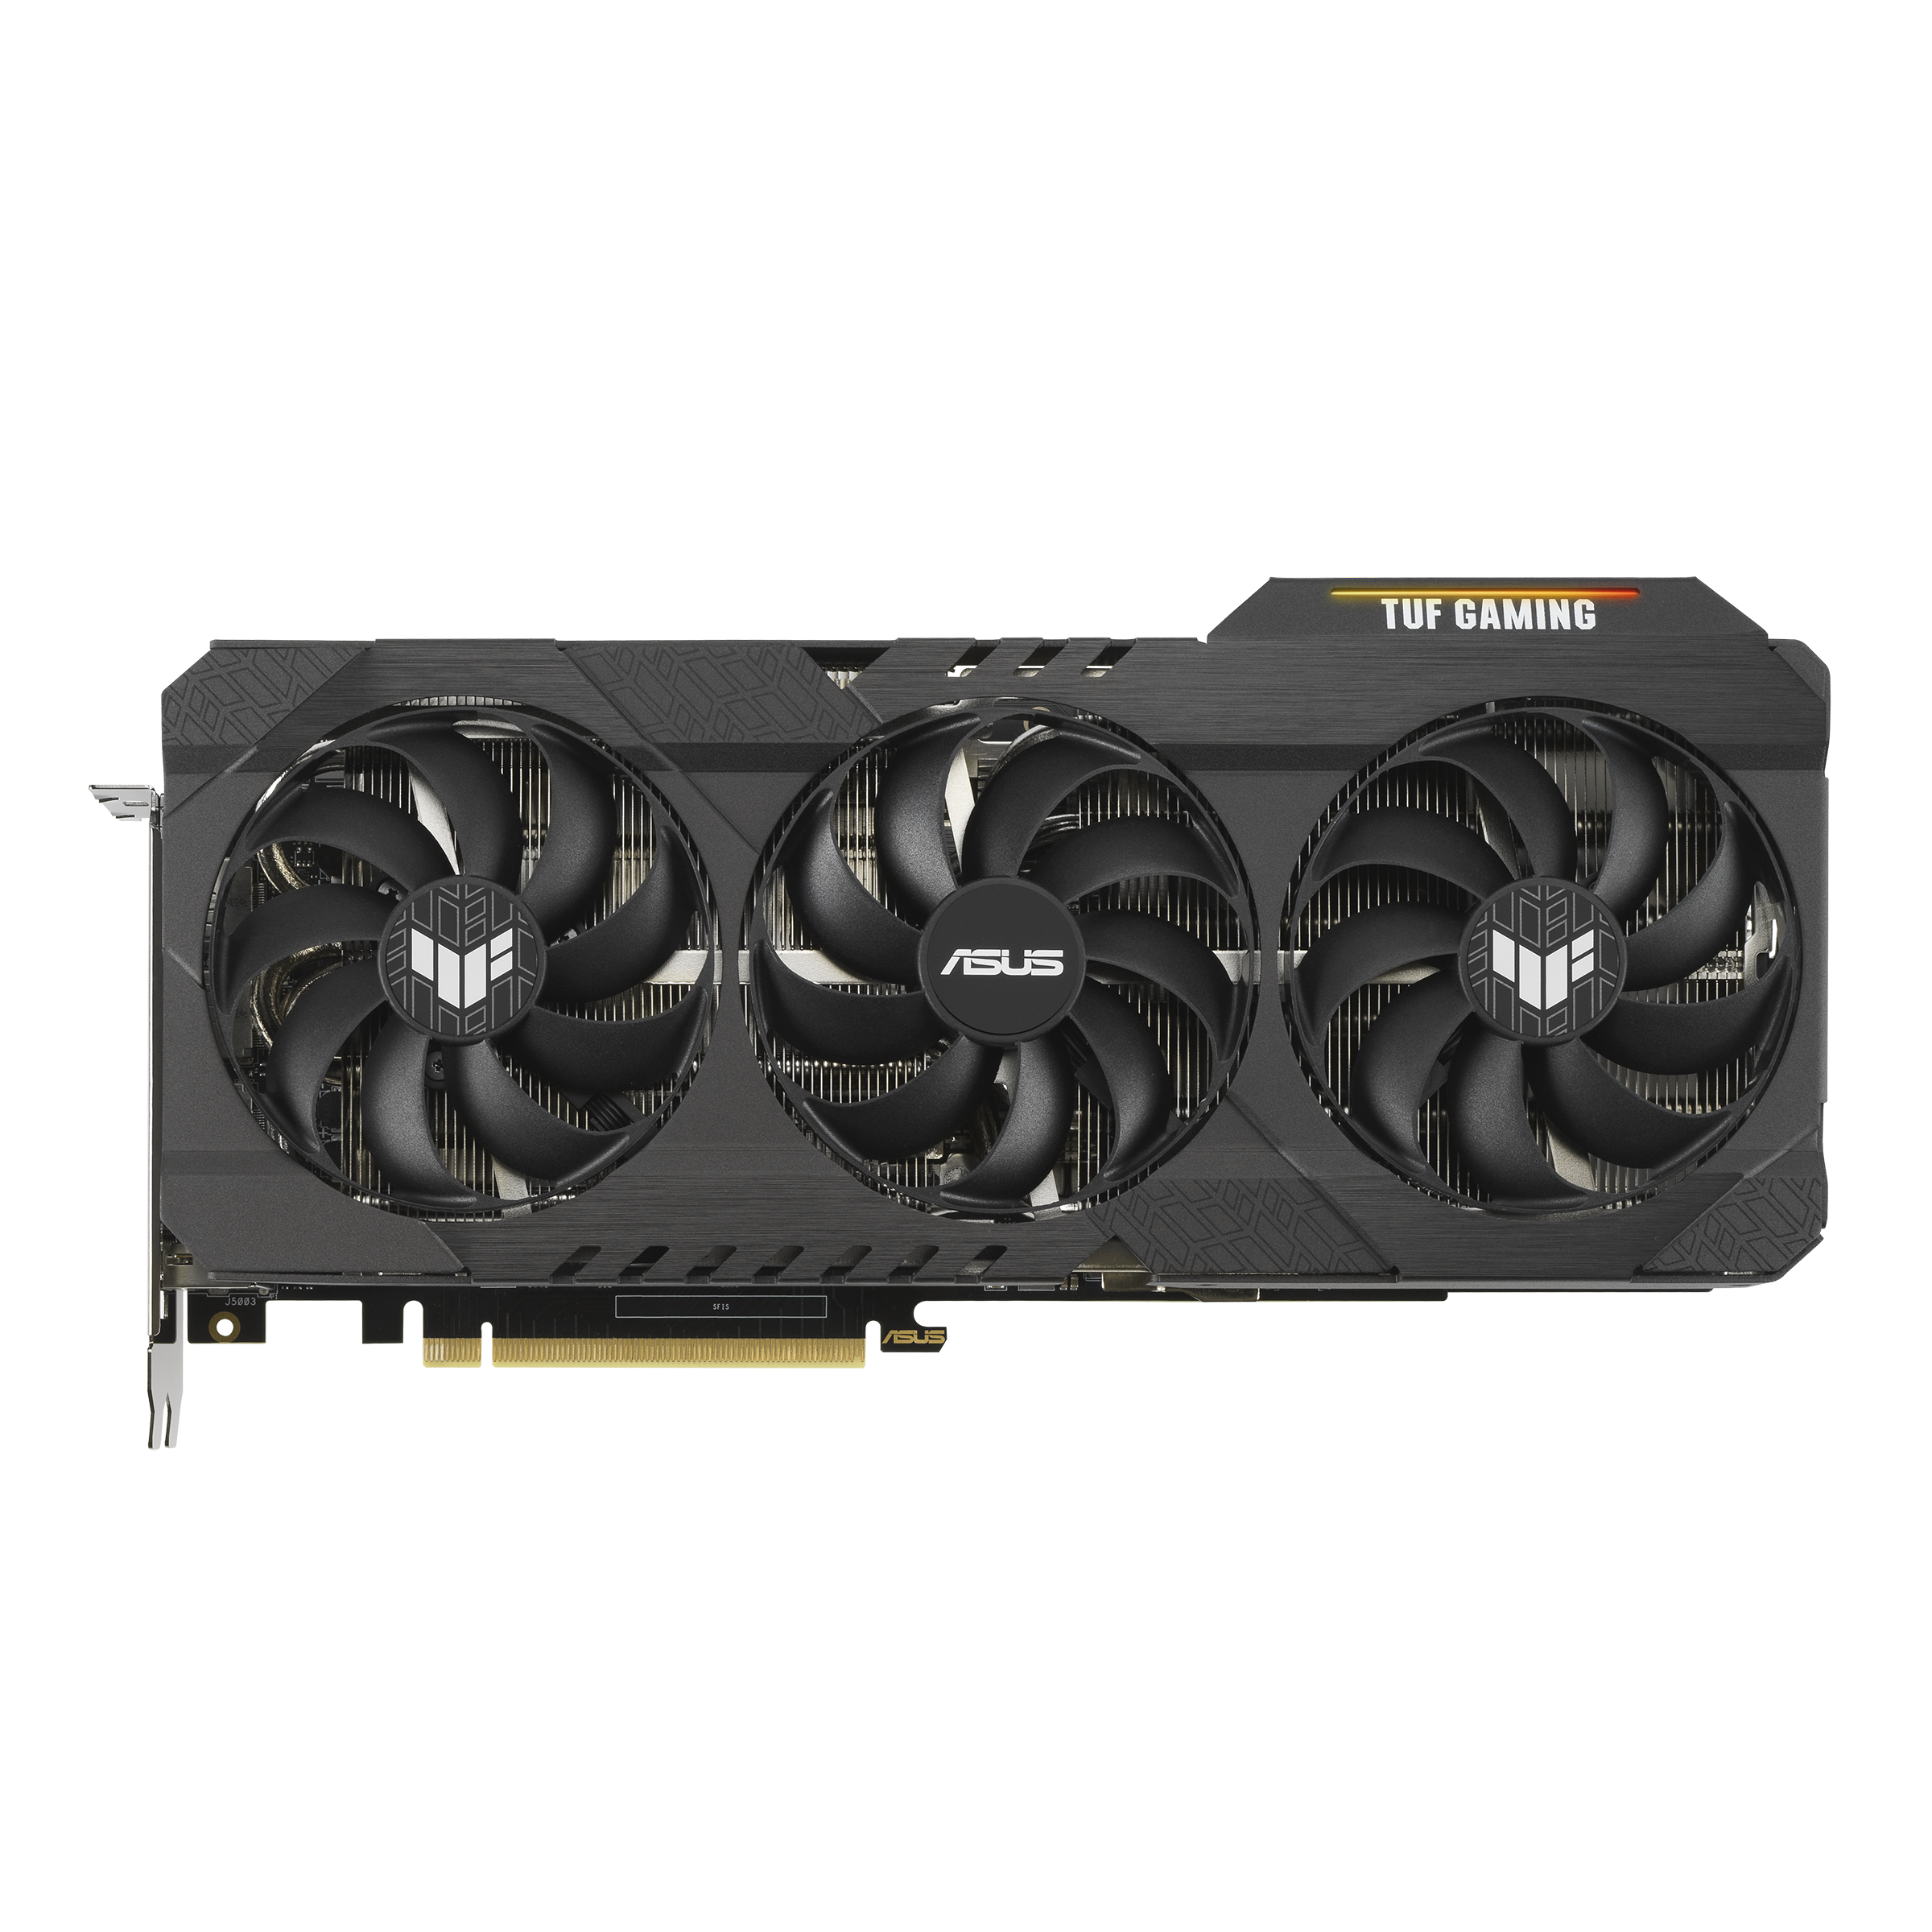 TUF-RTX3080-10G-GAMING｜Graphics Cards｜ASUS Global